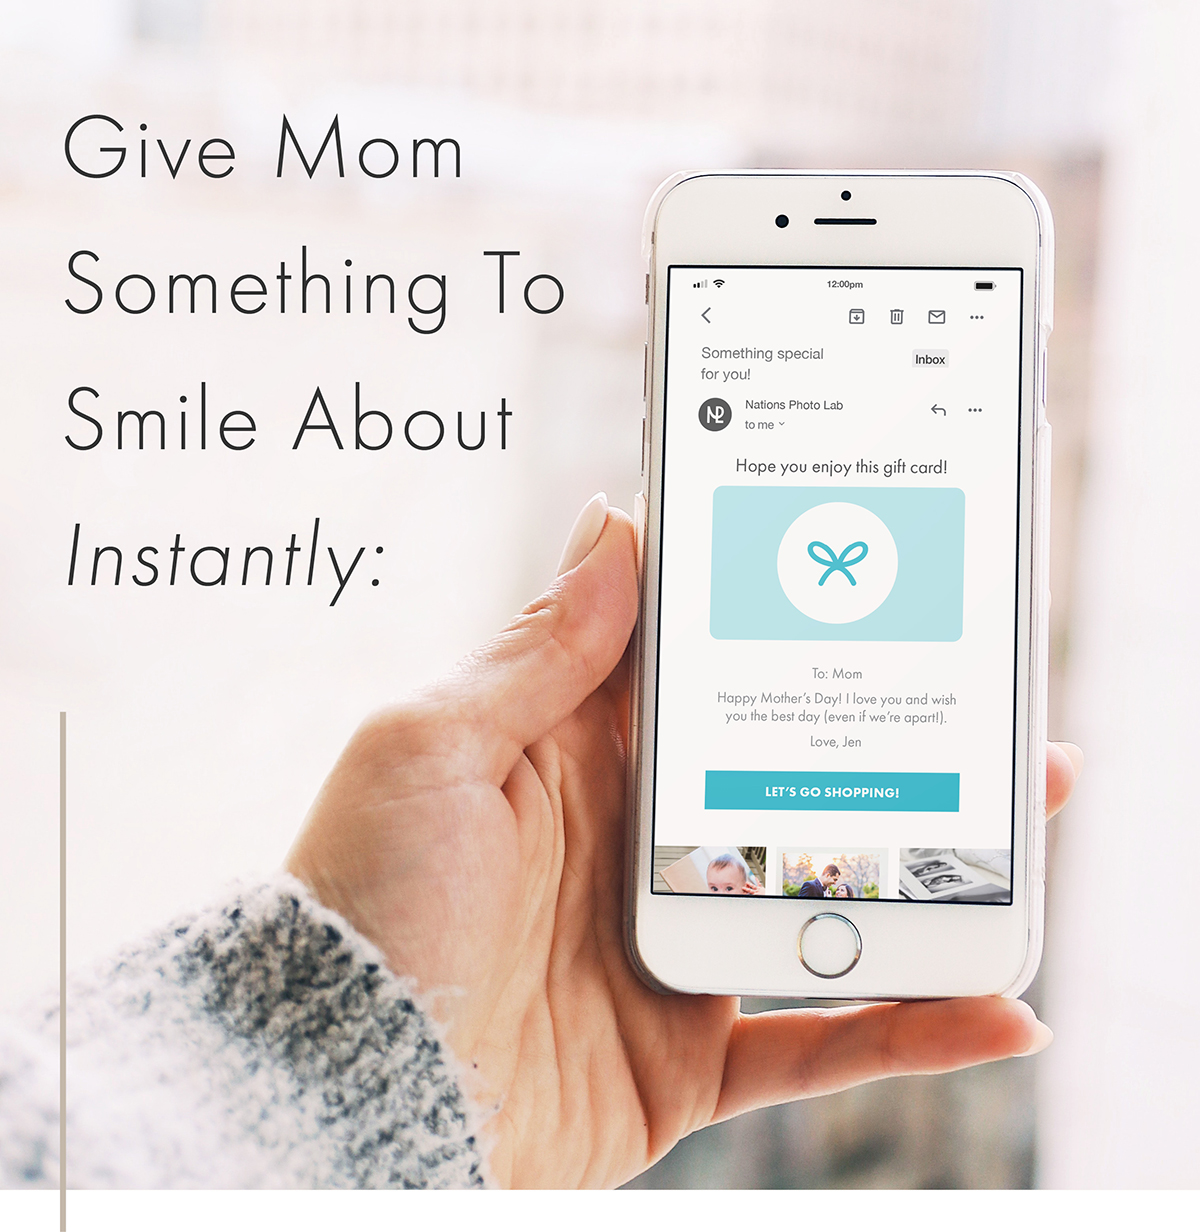 GIVE MOM SOMETHING TO SMILE ABOUT INSTANTLY: